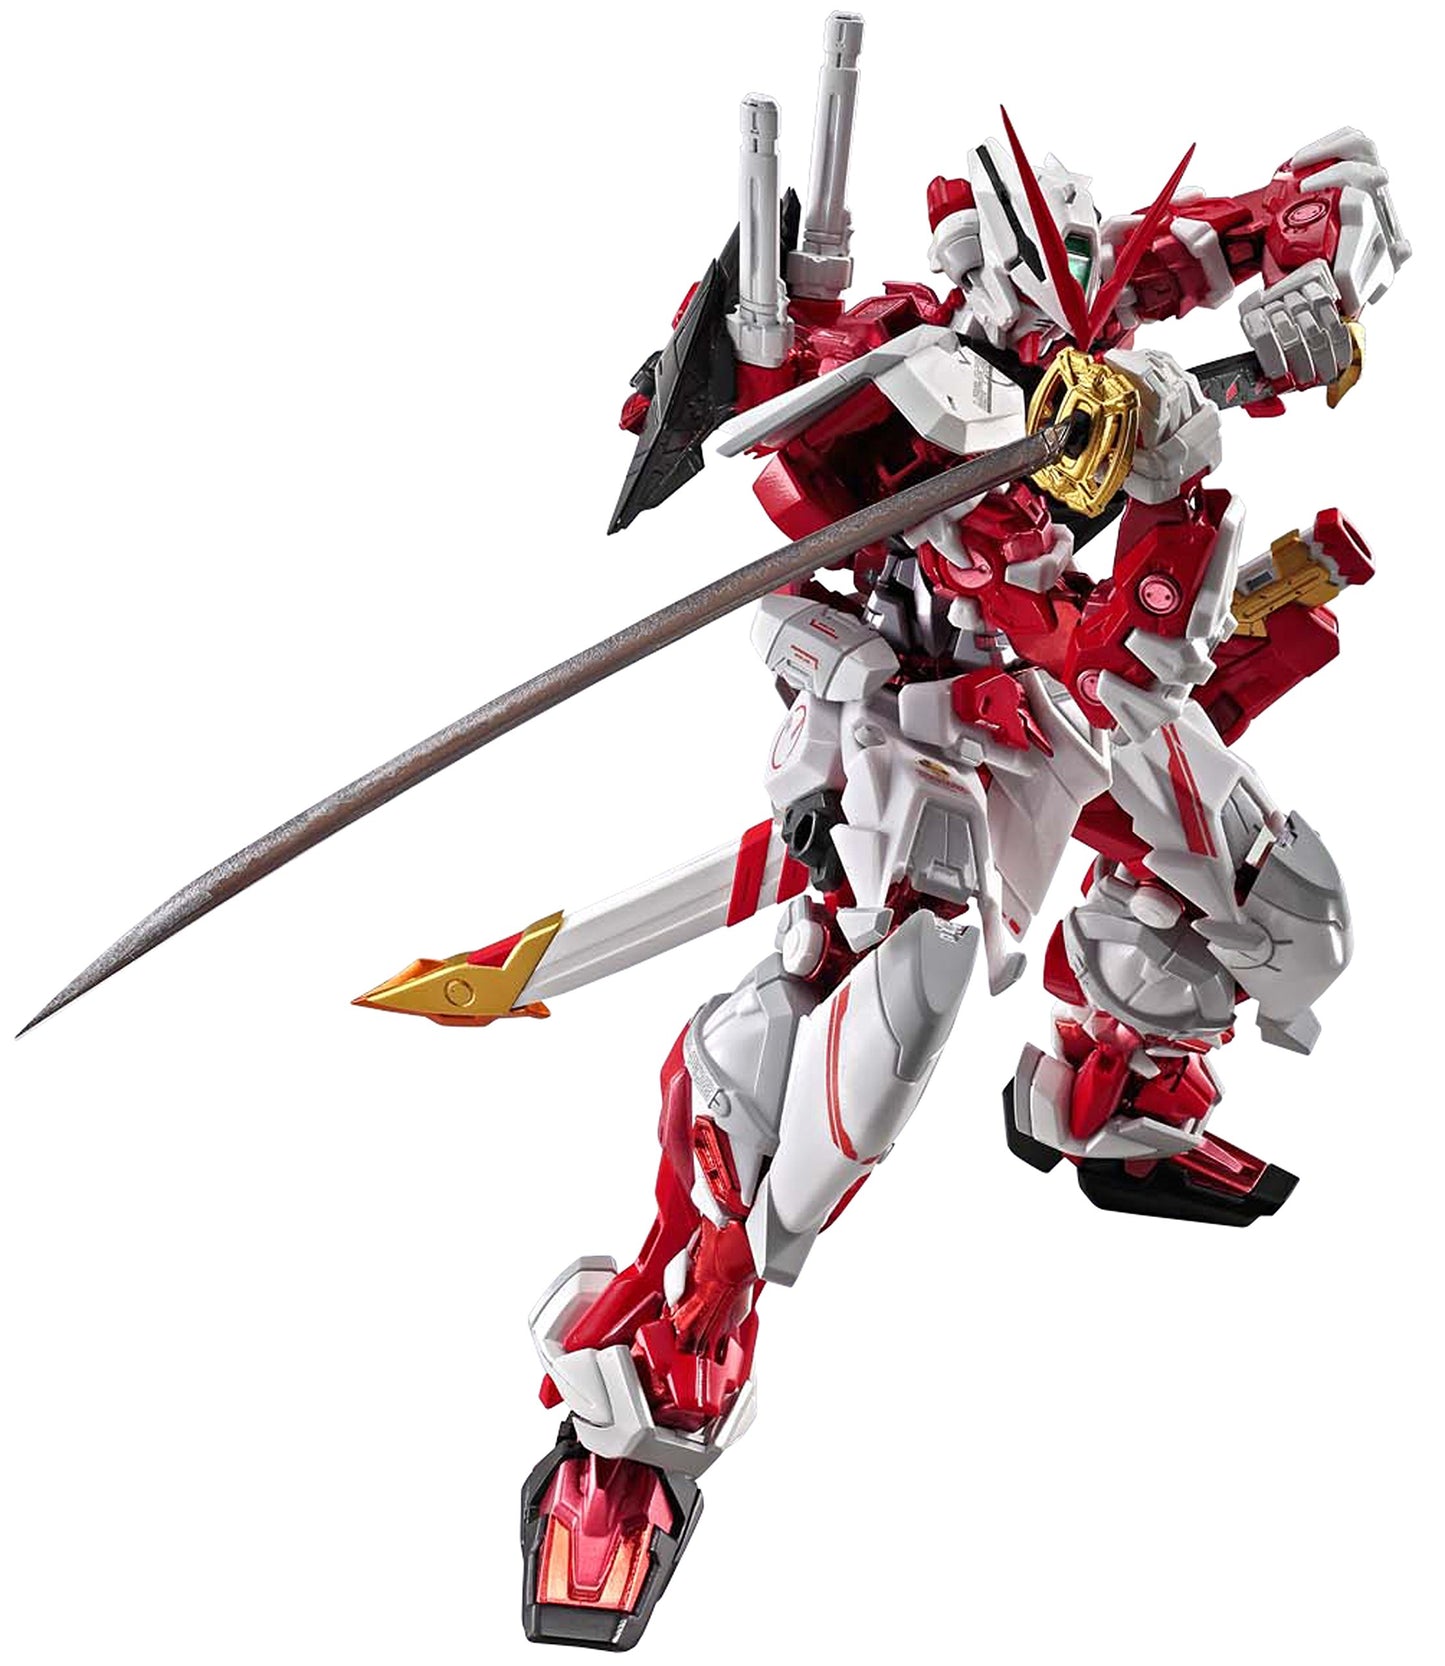 METAL BUILD - Gundam Astray Red Frame "Mobile Suit Gundam SEED Astray", Action & Toy Figures, animota